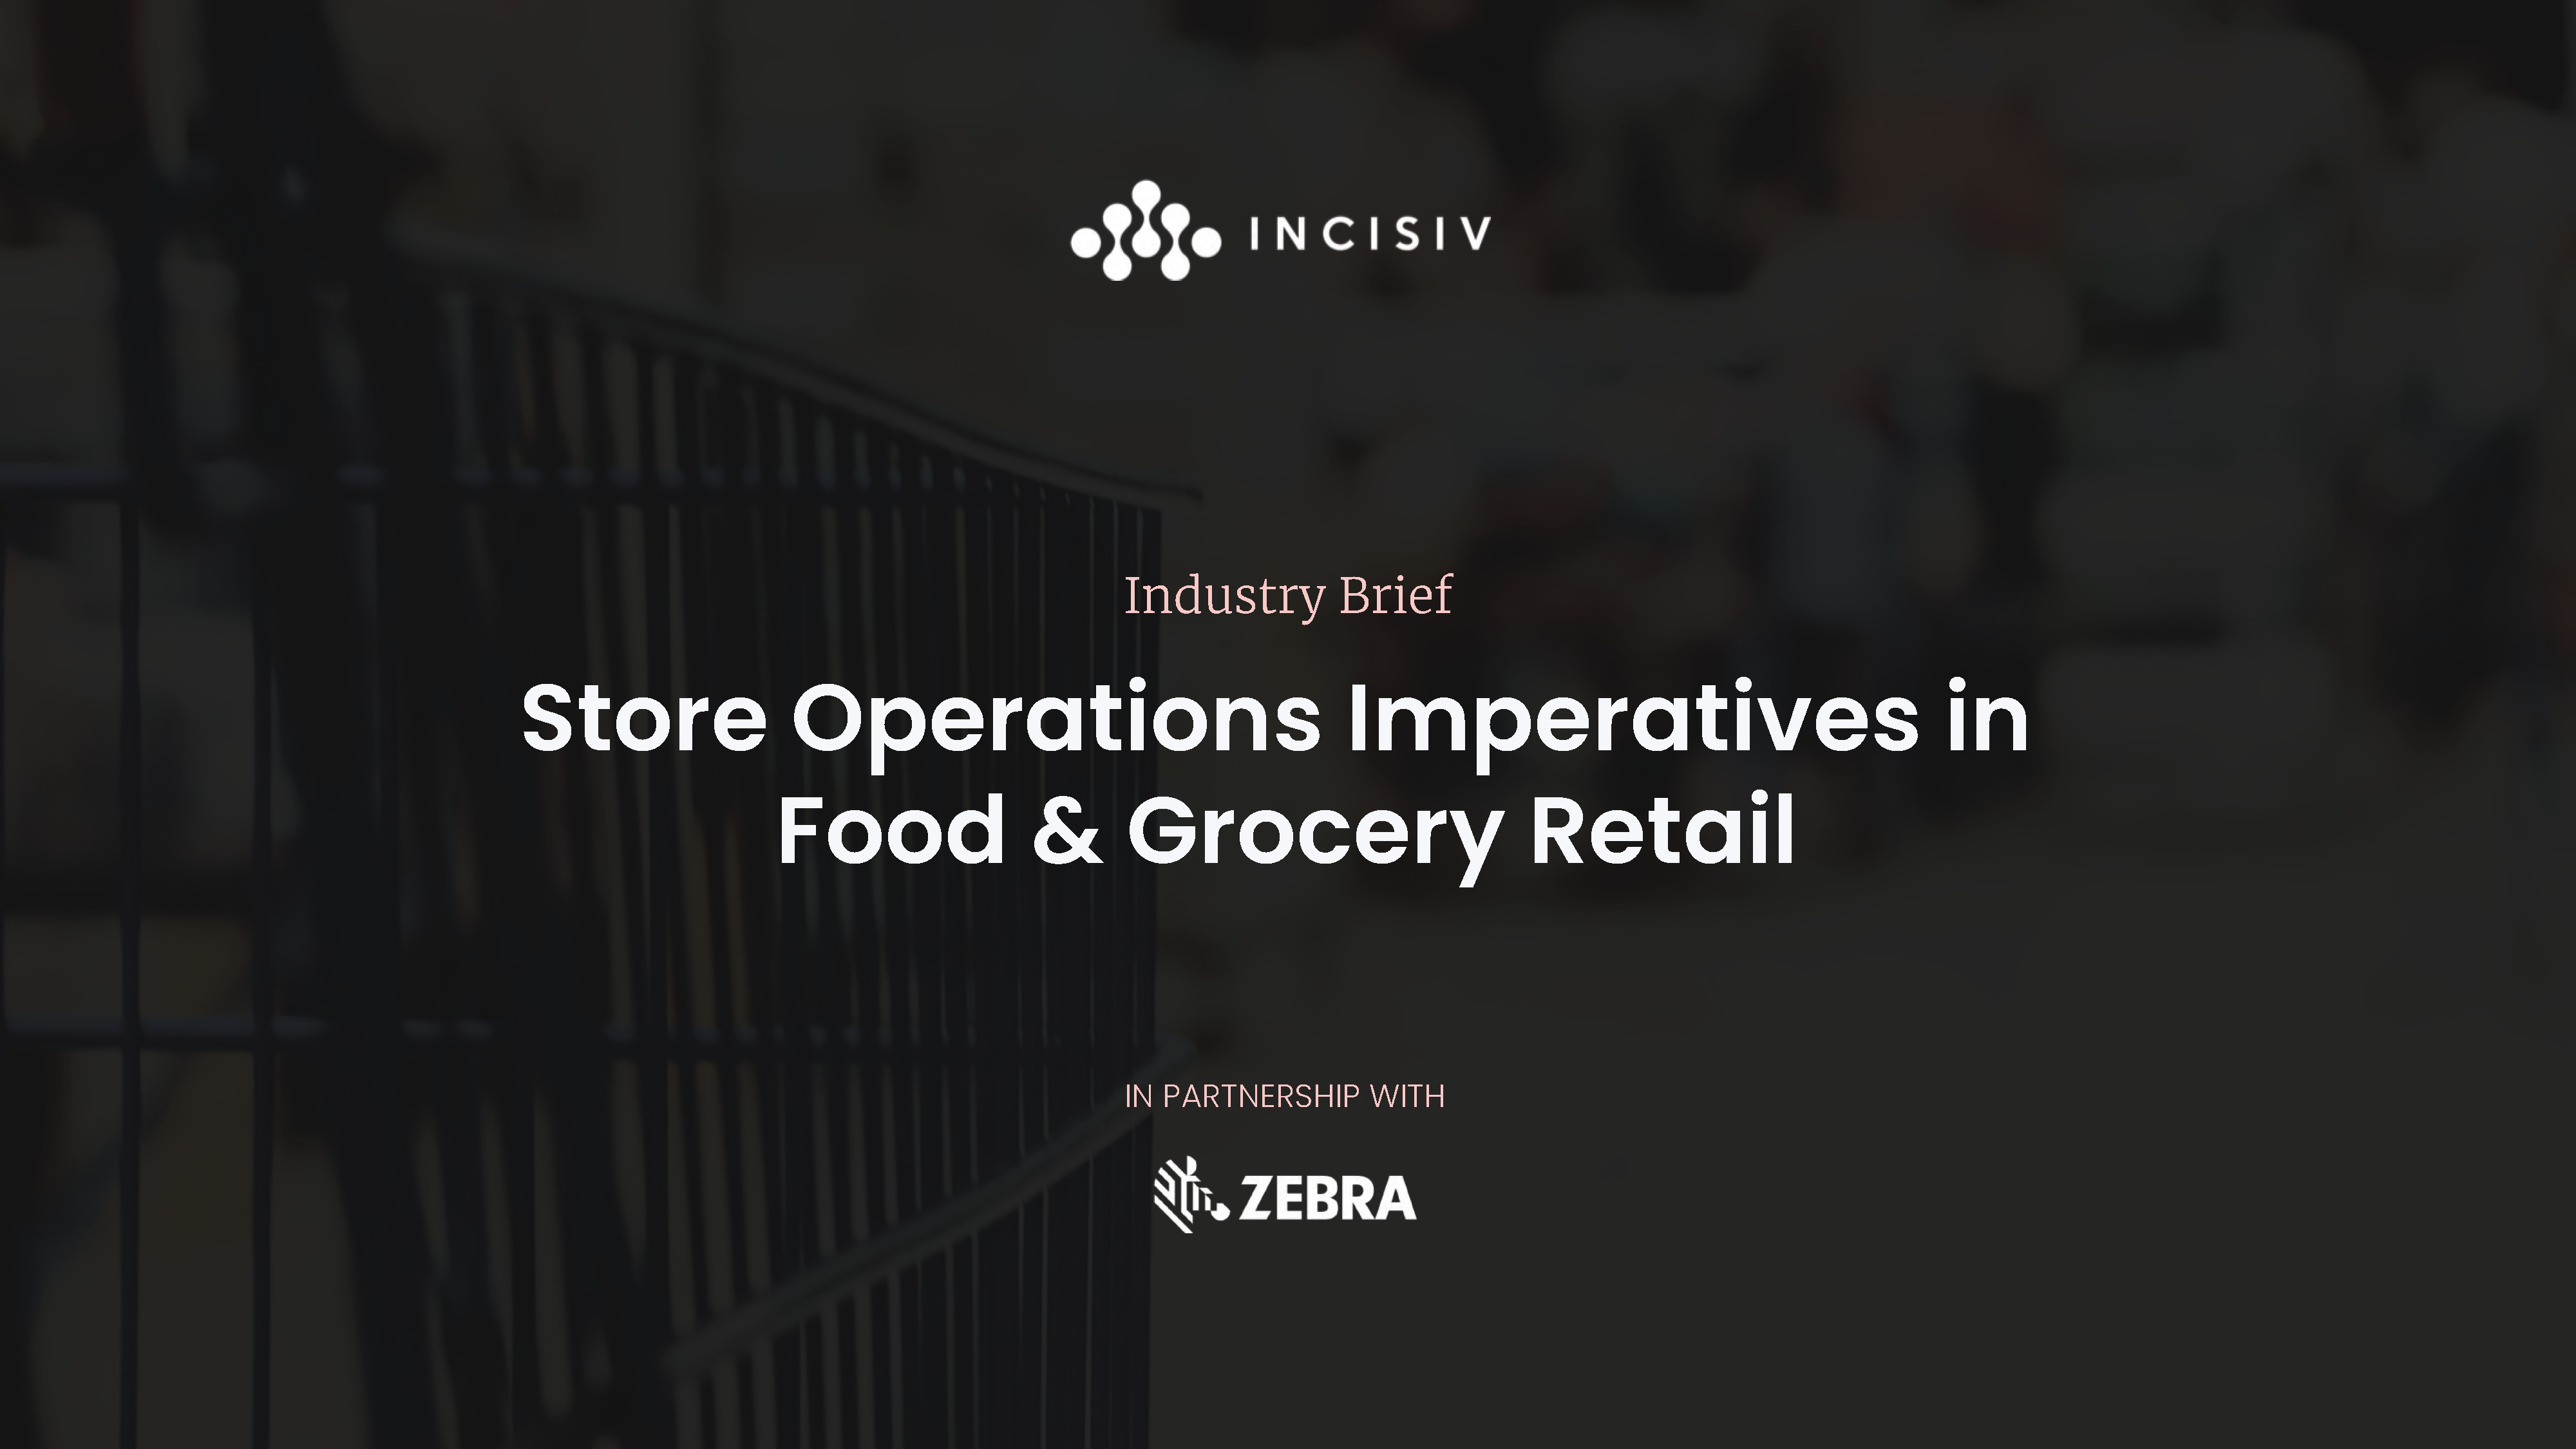 Store Operations Imperatives in Food & Grocery Retail